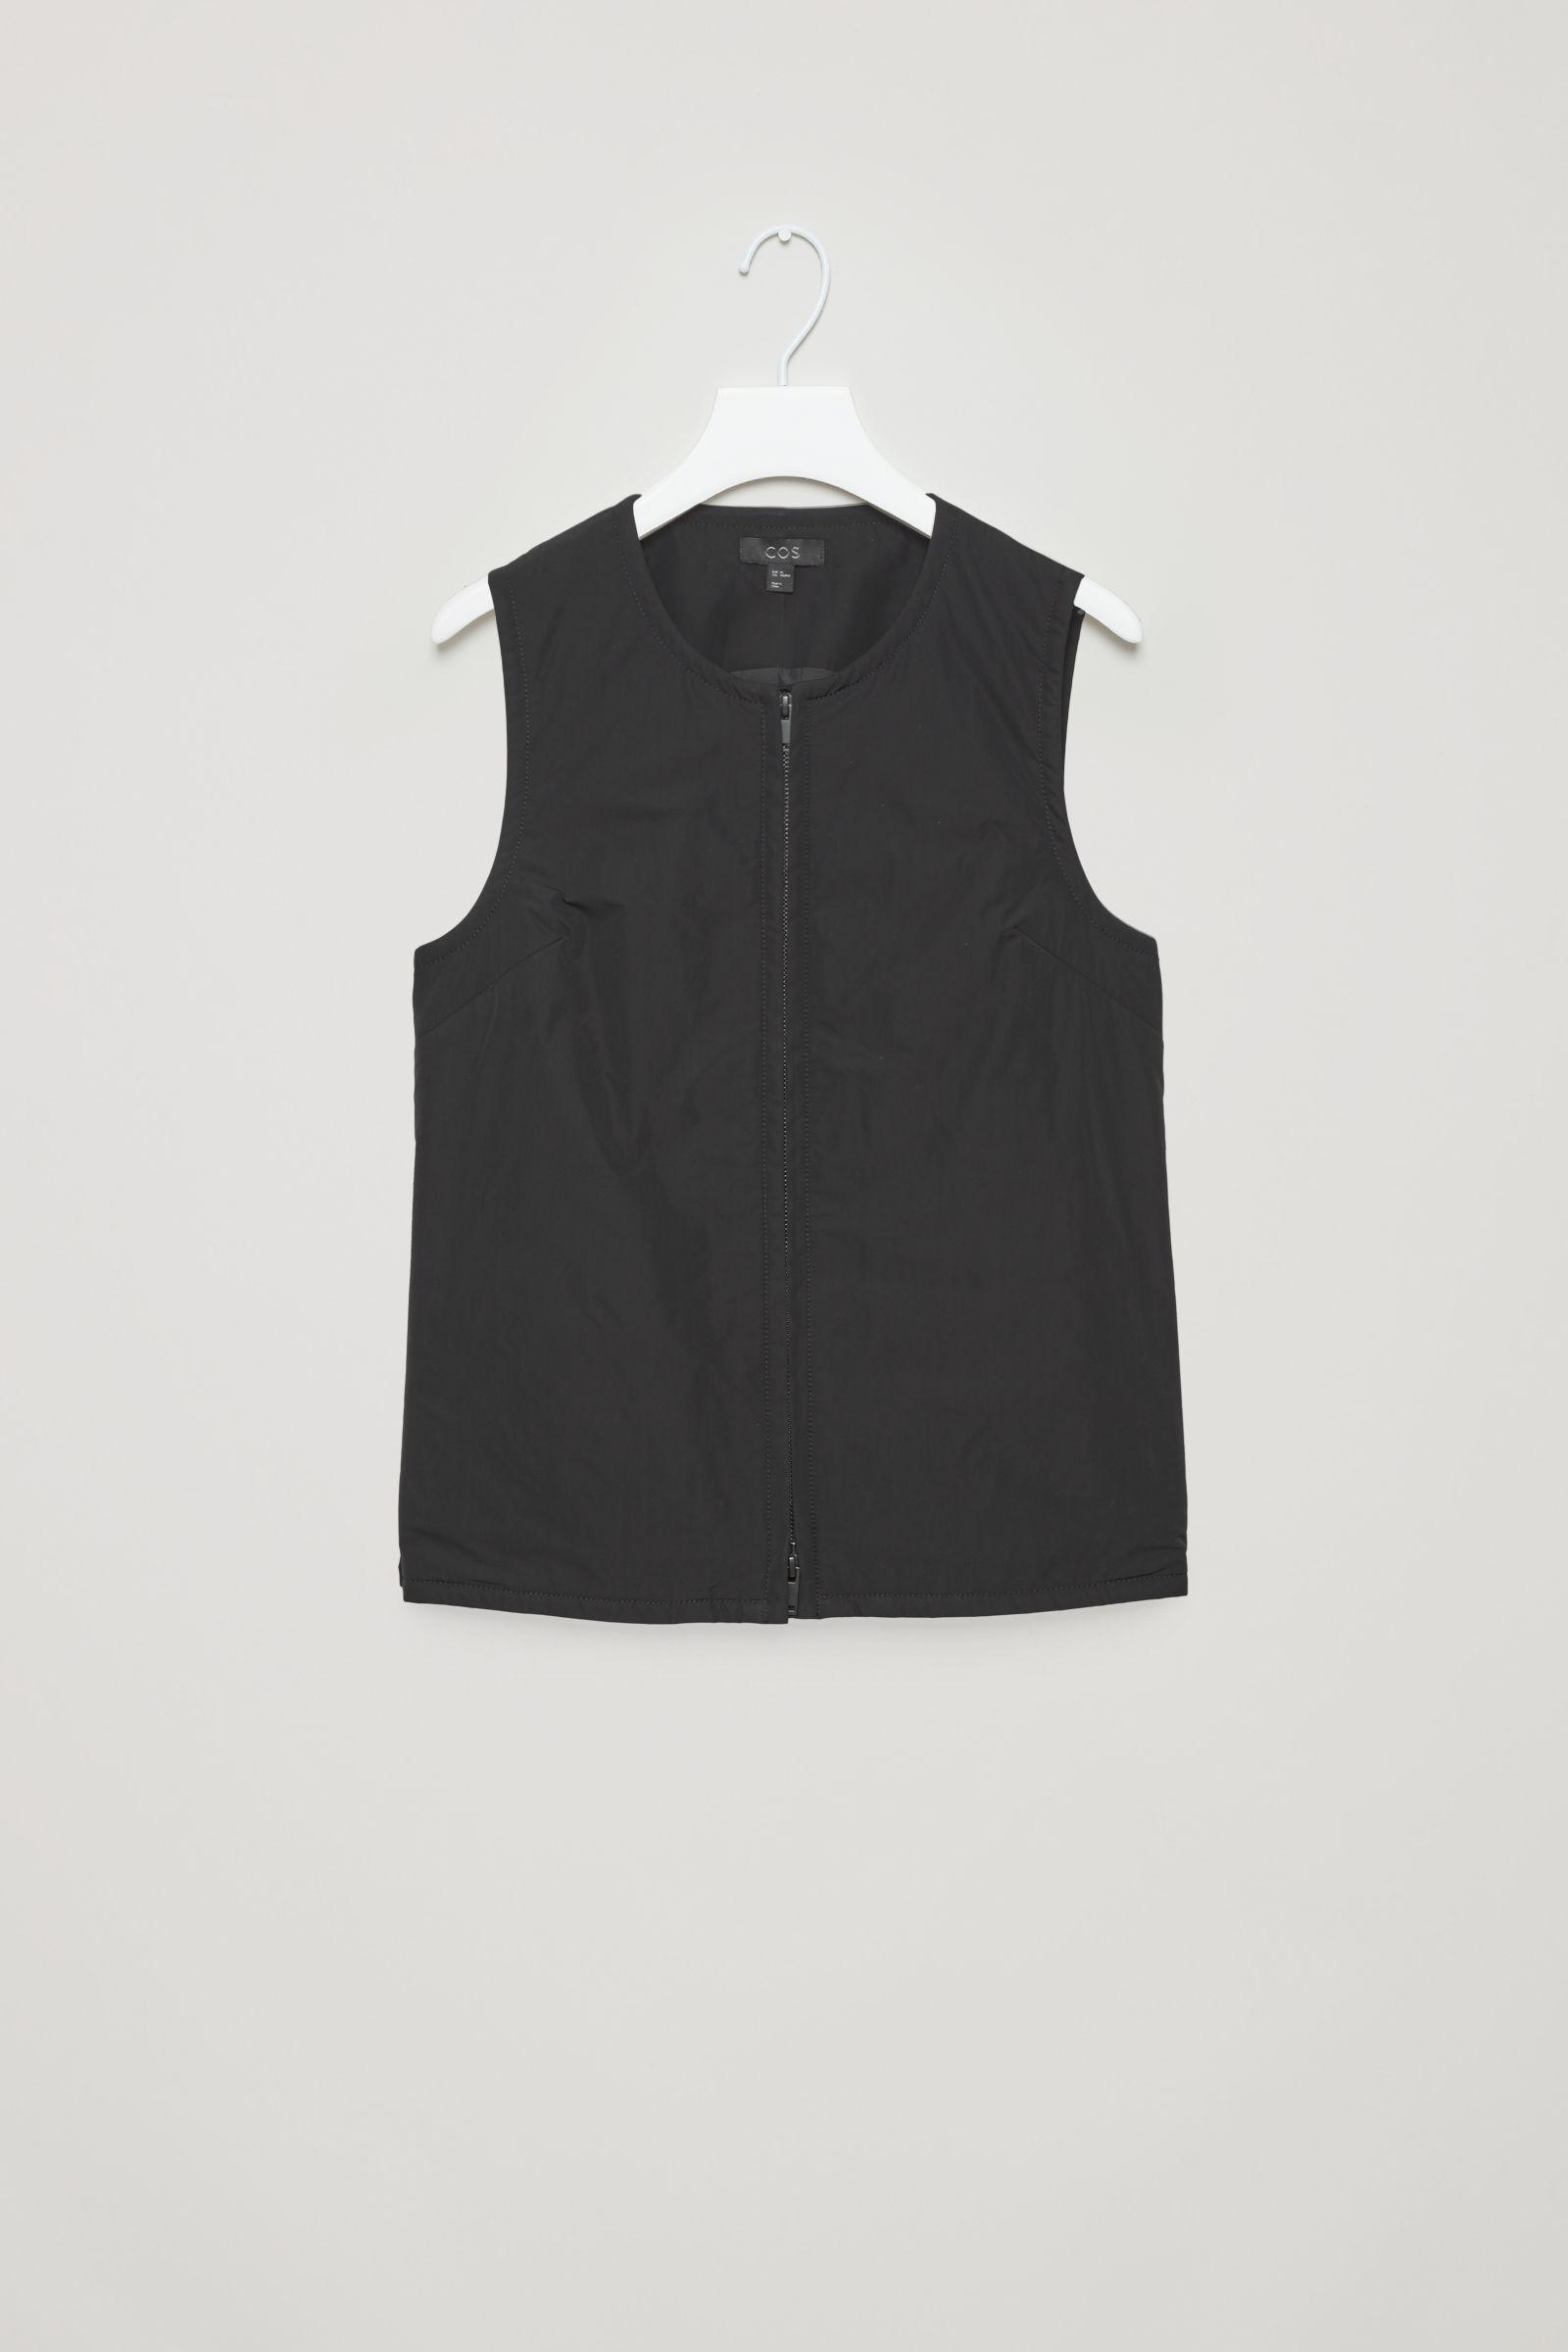 Lyst - Cos Padded Gilet in Black